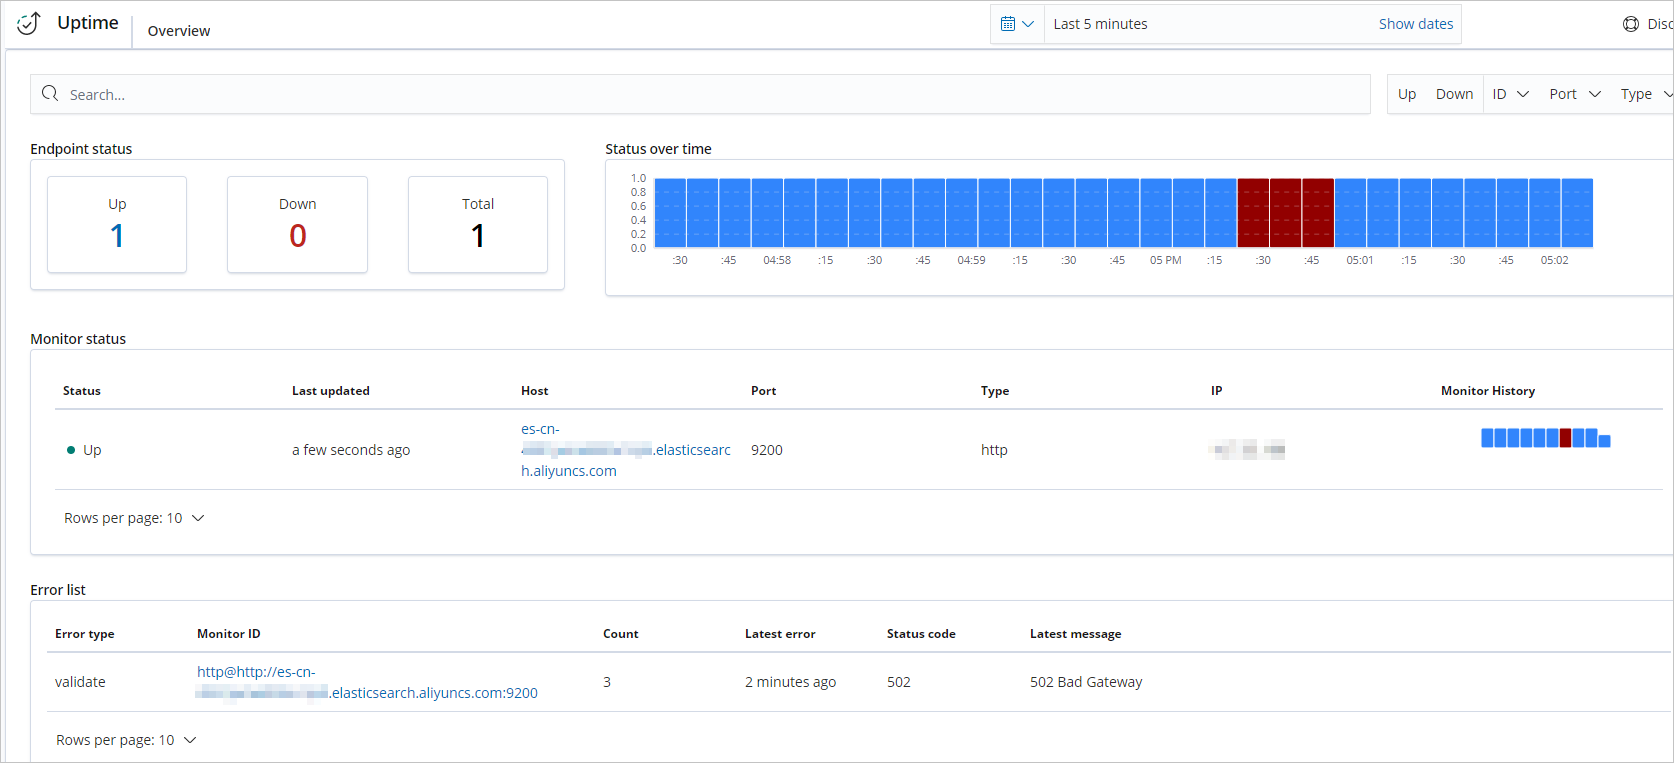 View the monitoring information on the Uptime page